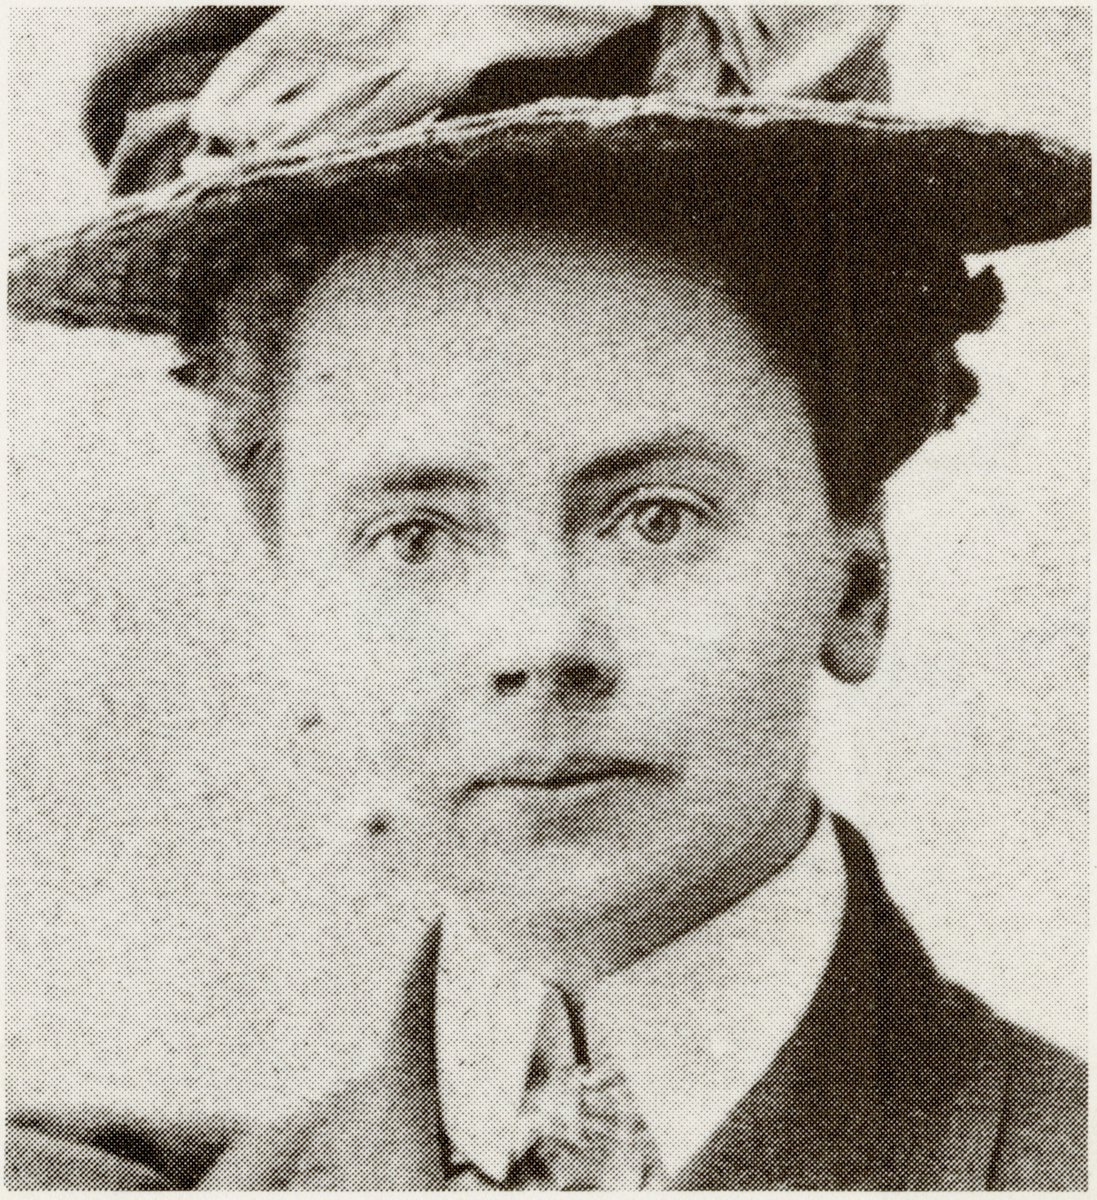 Happy Birthday to Julia Morgan! Morgan went to Paris to attend the Ecole des Beaux-Arts and in 1901, became the first women to graduate in architecture. Upon return she also became the first woman architect licensed in California. #JuliaMorgan #architect #Icon